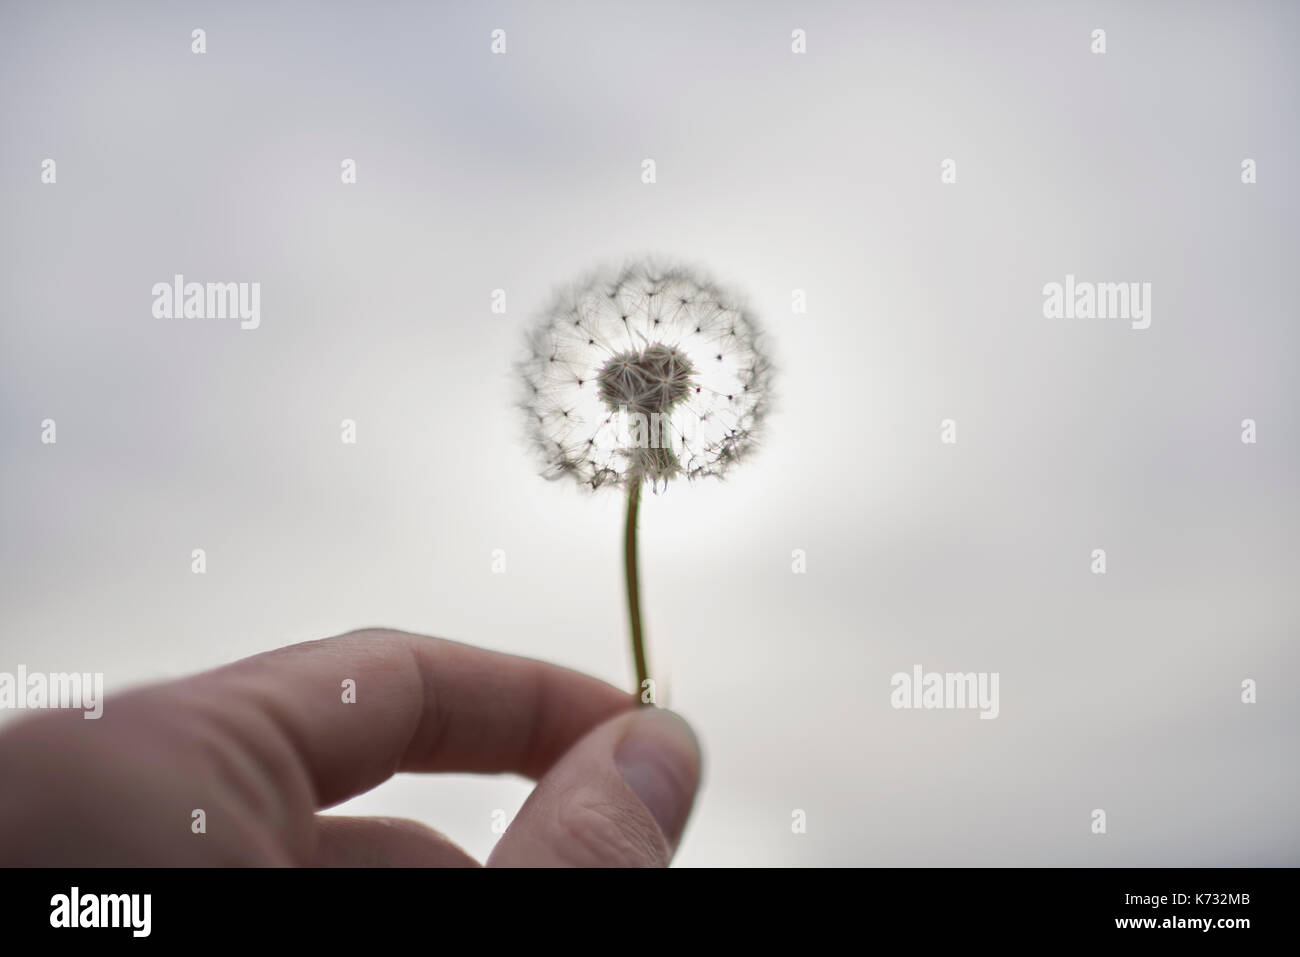 Hand holding a dandelion against a clear sky. Stock Photo